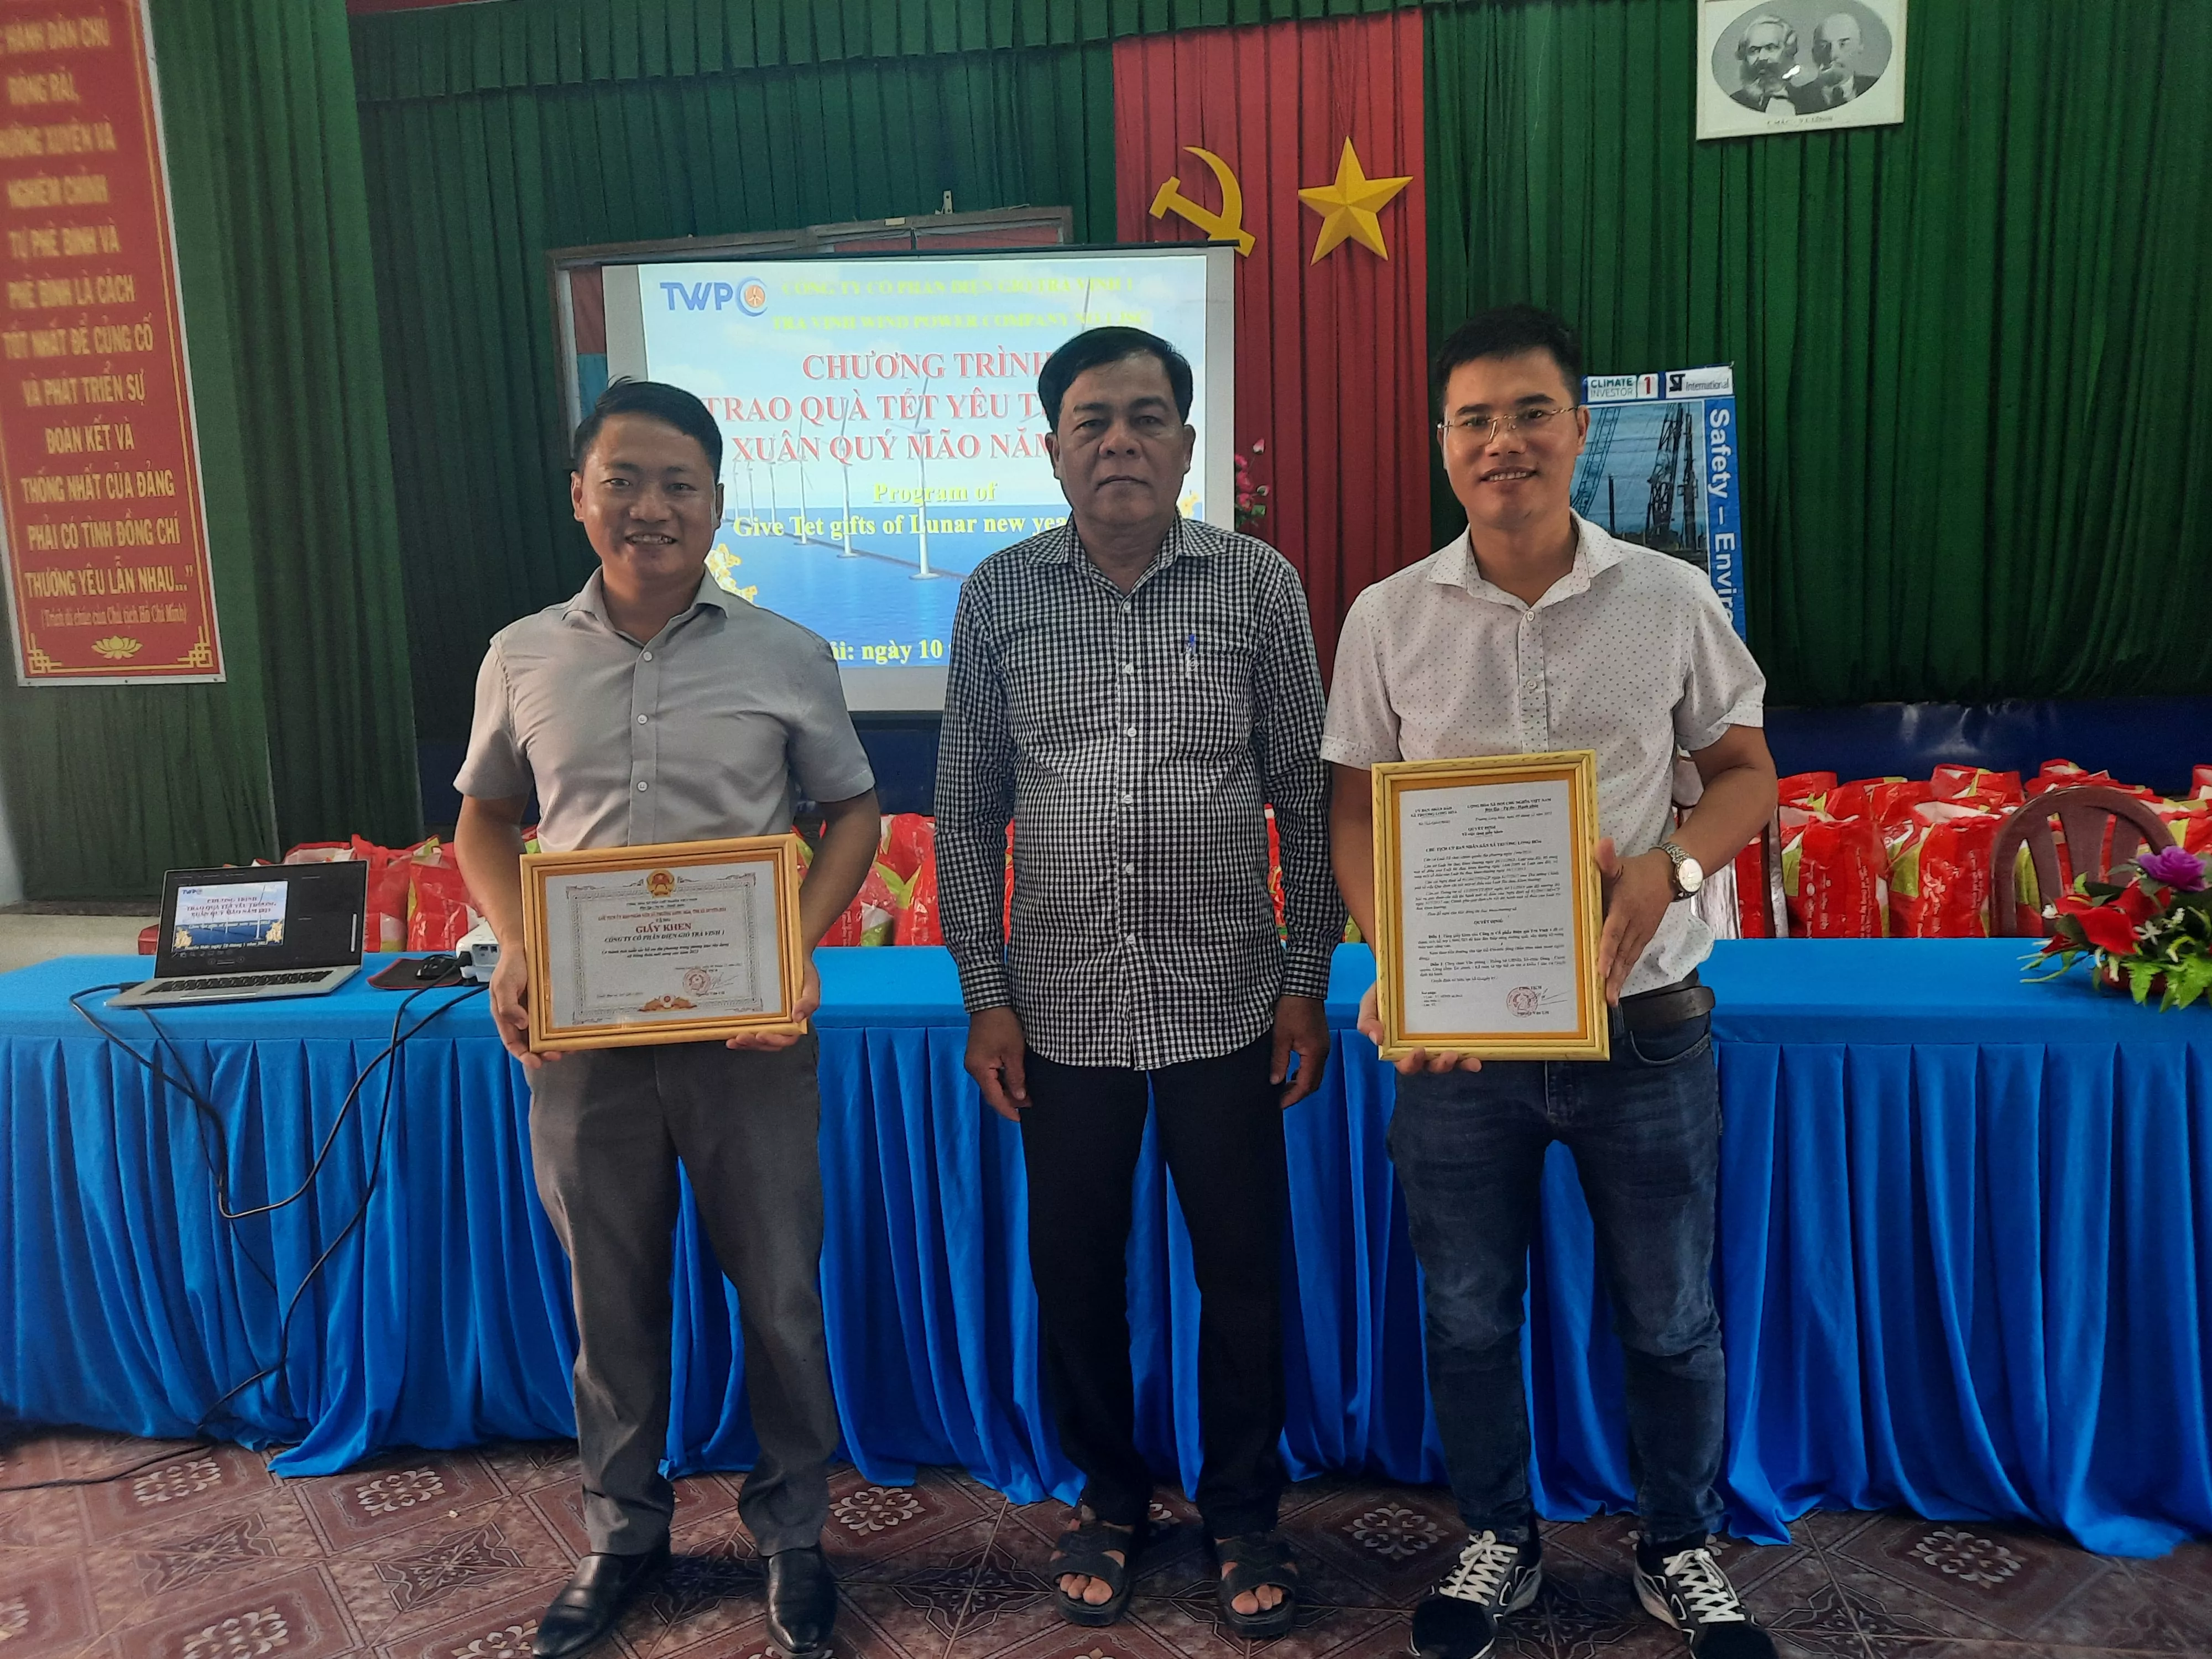 Picture 1: TWPC received a certificate of merit from Truong Long Hoa Commune People's Committee (Photo courtesy of TWPC)